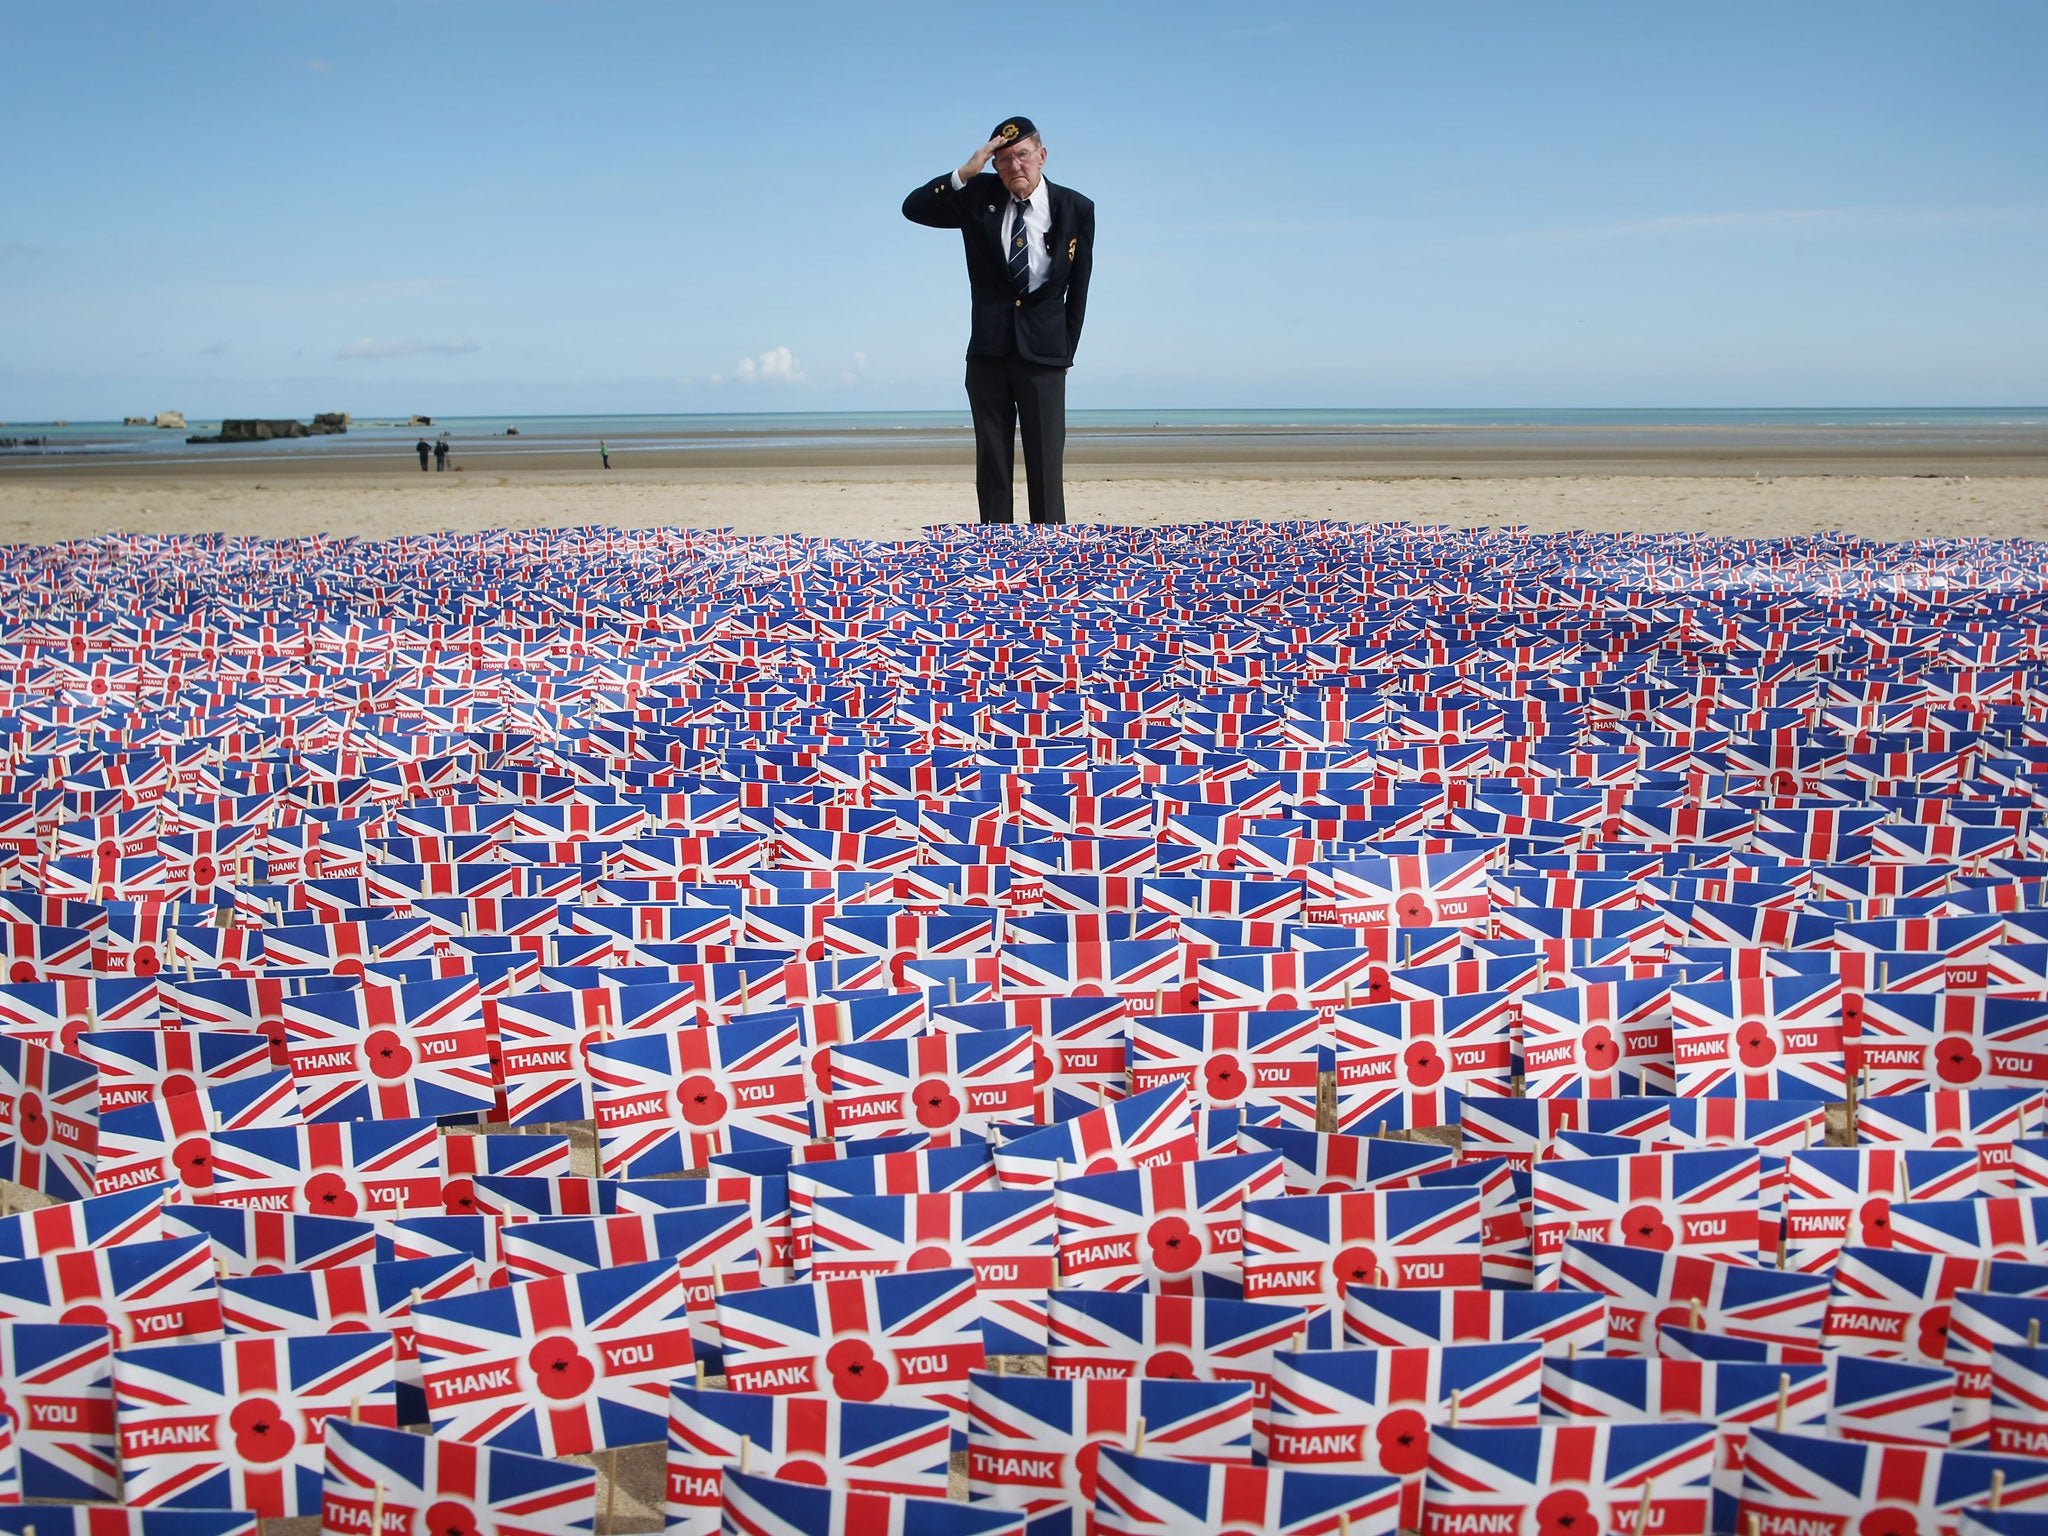 WW2 veteran Fred Holborn, from the Fleet Air Arm, salutes as he looks at British Legion Union flags carrying thank you messages planted in the sand on Gold beach near Asnelles, France. 20,000 paper flags are being planted. Each one carries a personal mess